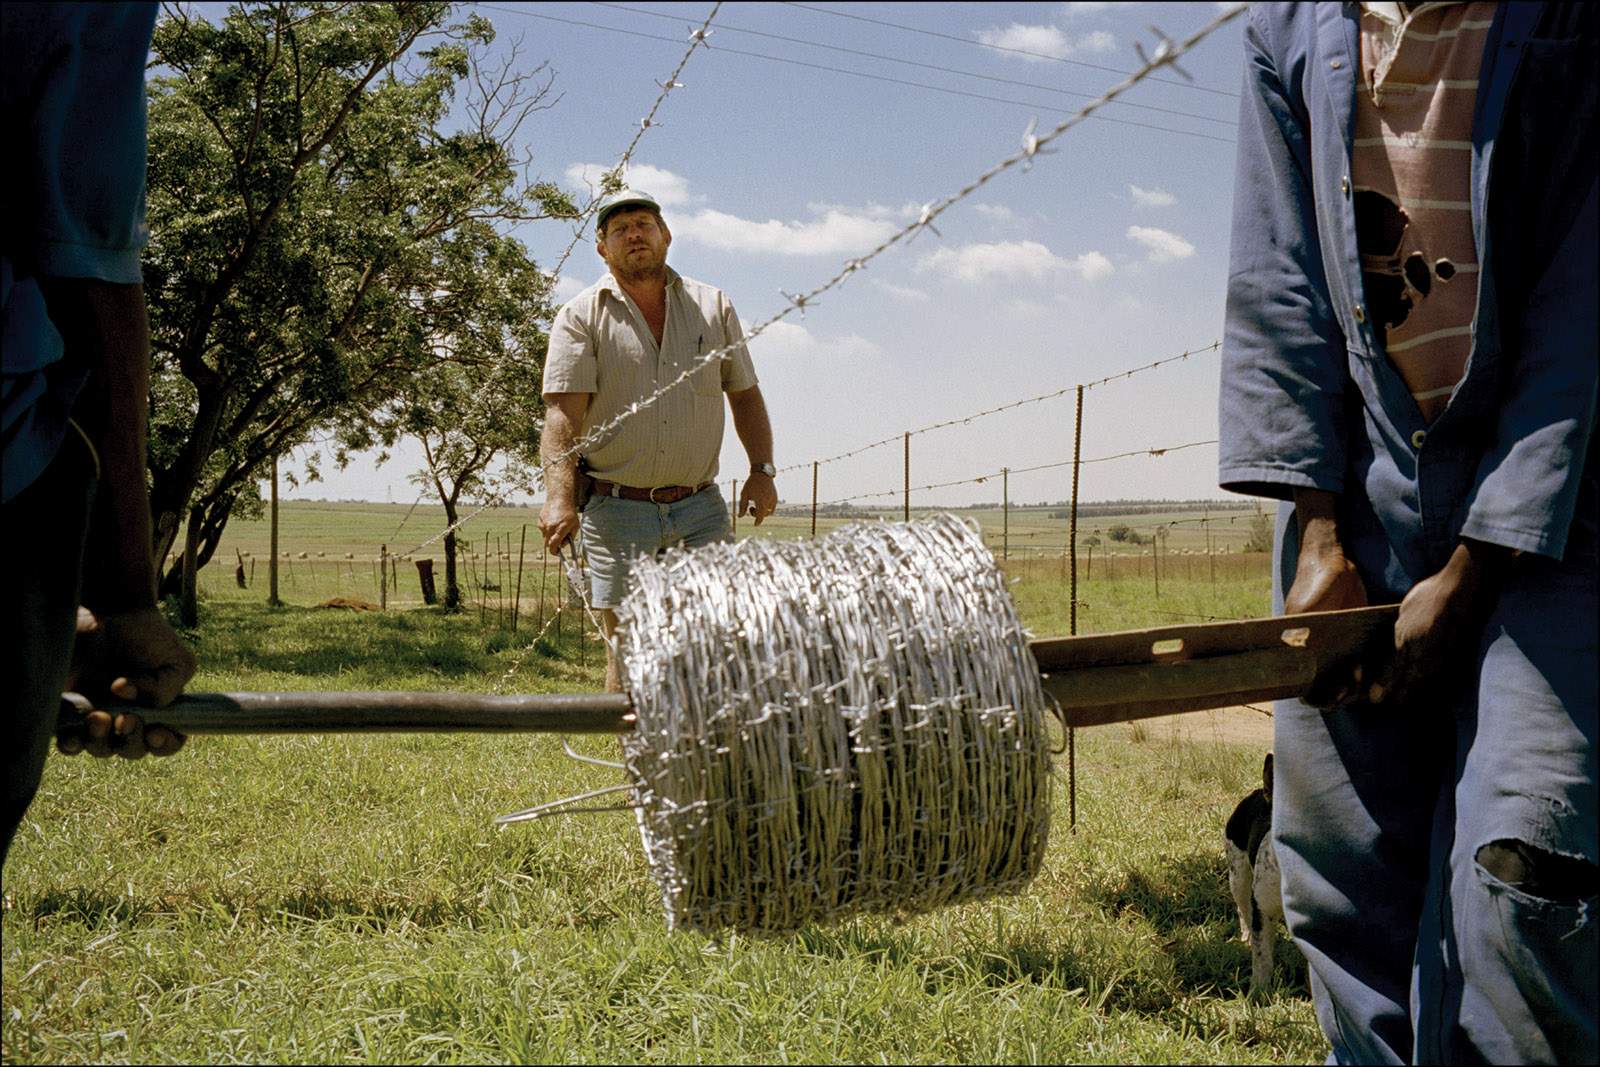 An Afrikaner farmer overseeing the reinforcement of his barbed-wire fencing, near Balfour, South Africa